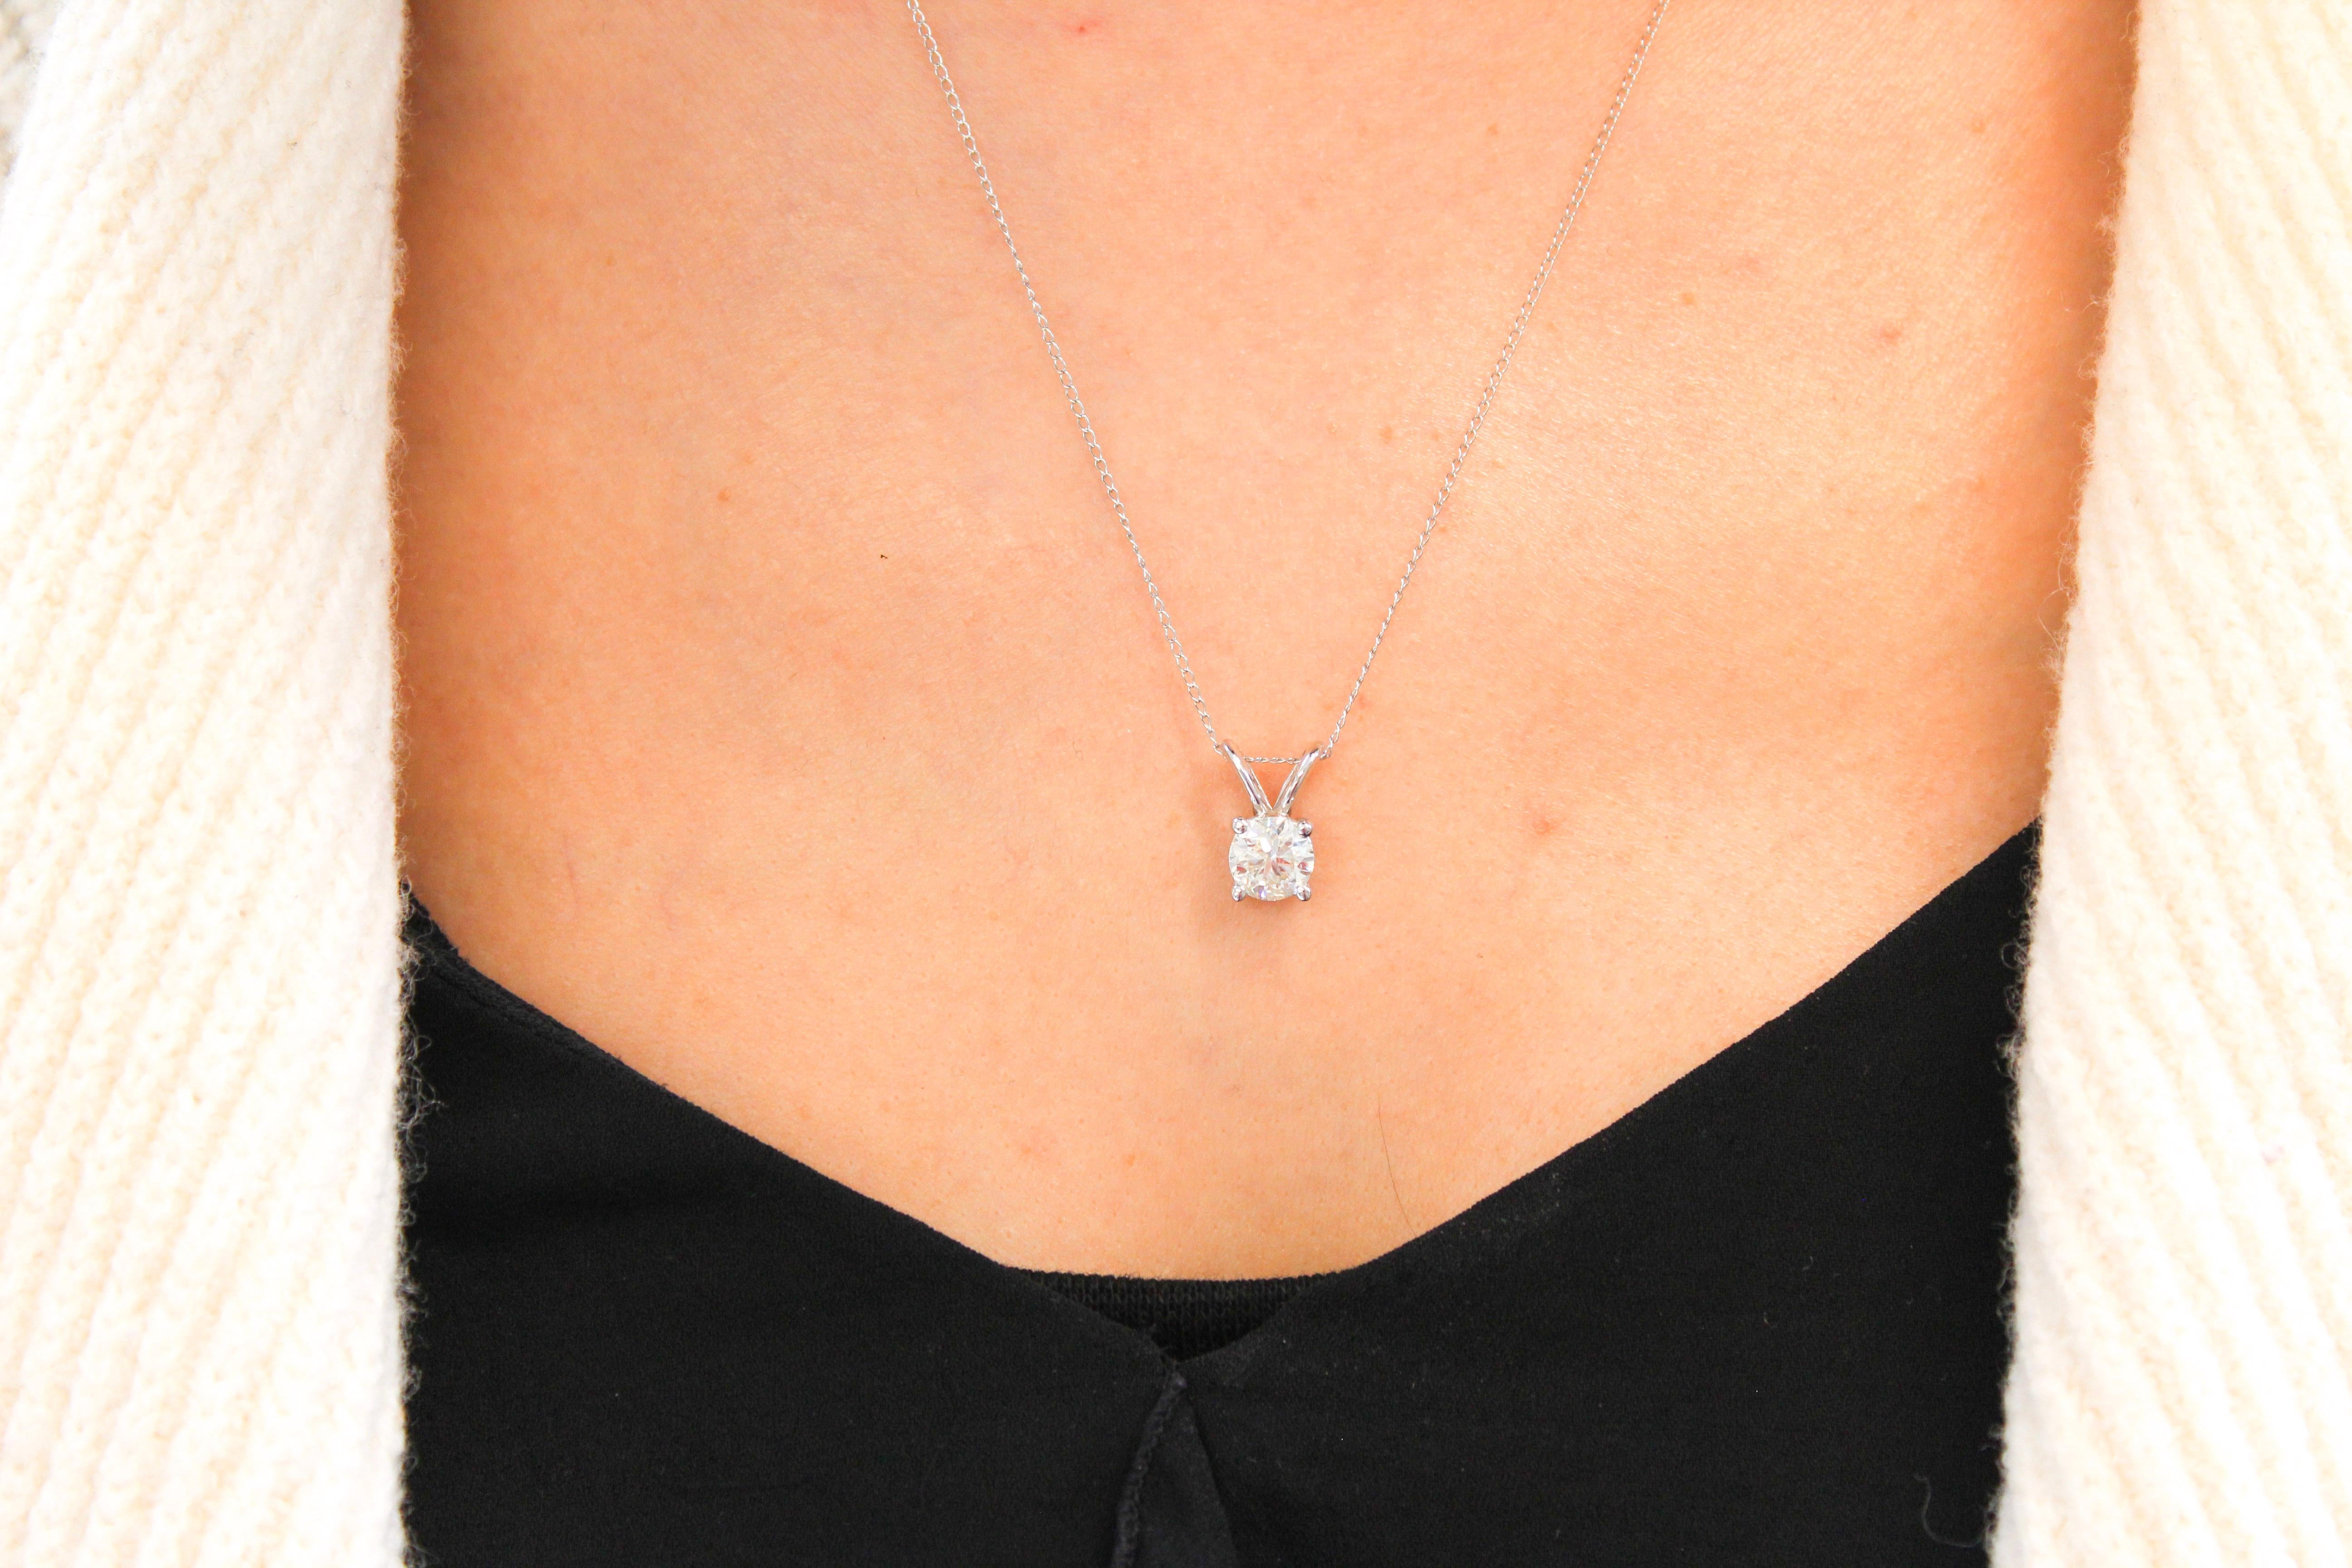 This impressive diamond solitaire pendant is finely crafted in brightly polished 14 karat rose gold and features a round shaped 1.25 carat diamond that has I1 clarity, gracefully prong set on a shiny split bail. Ideal as an anniversary or birthday